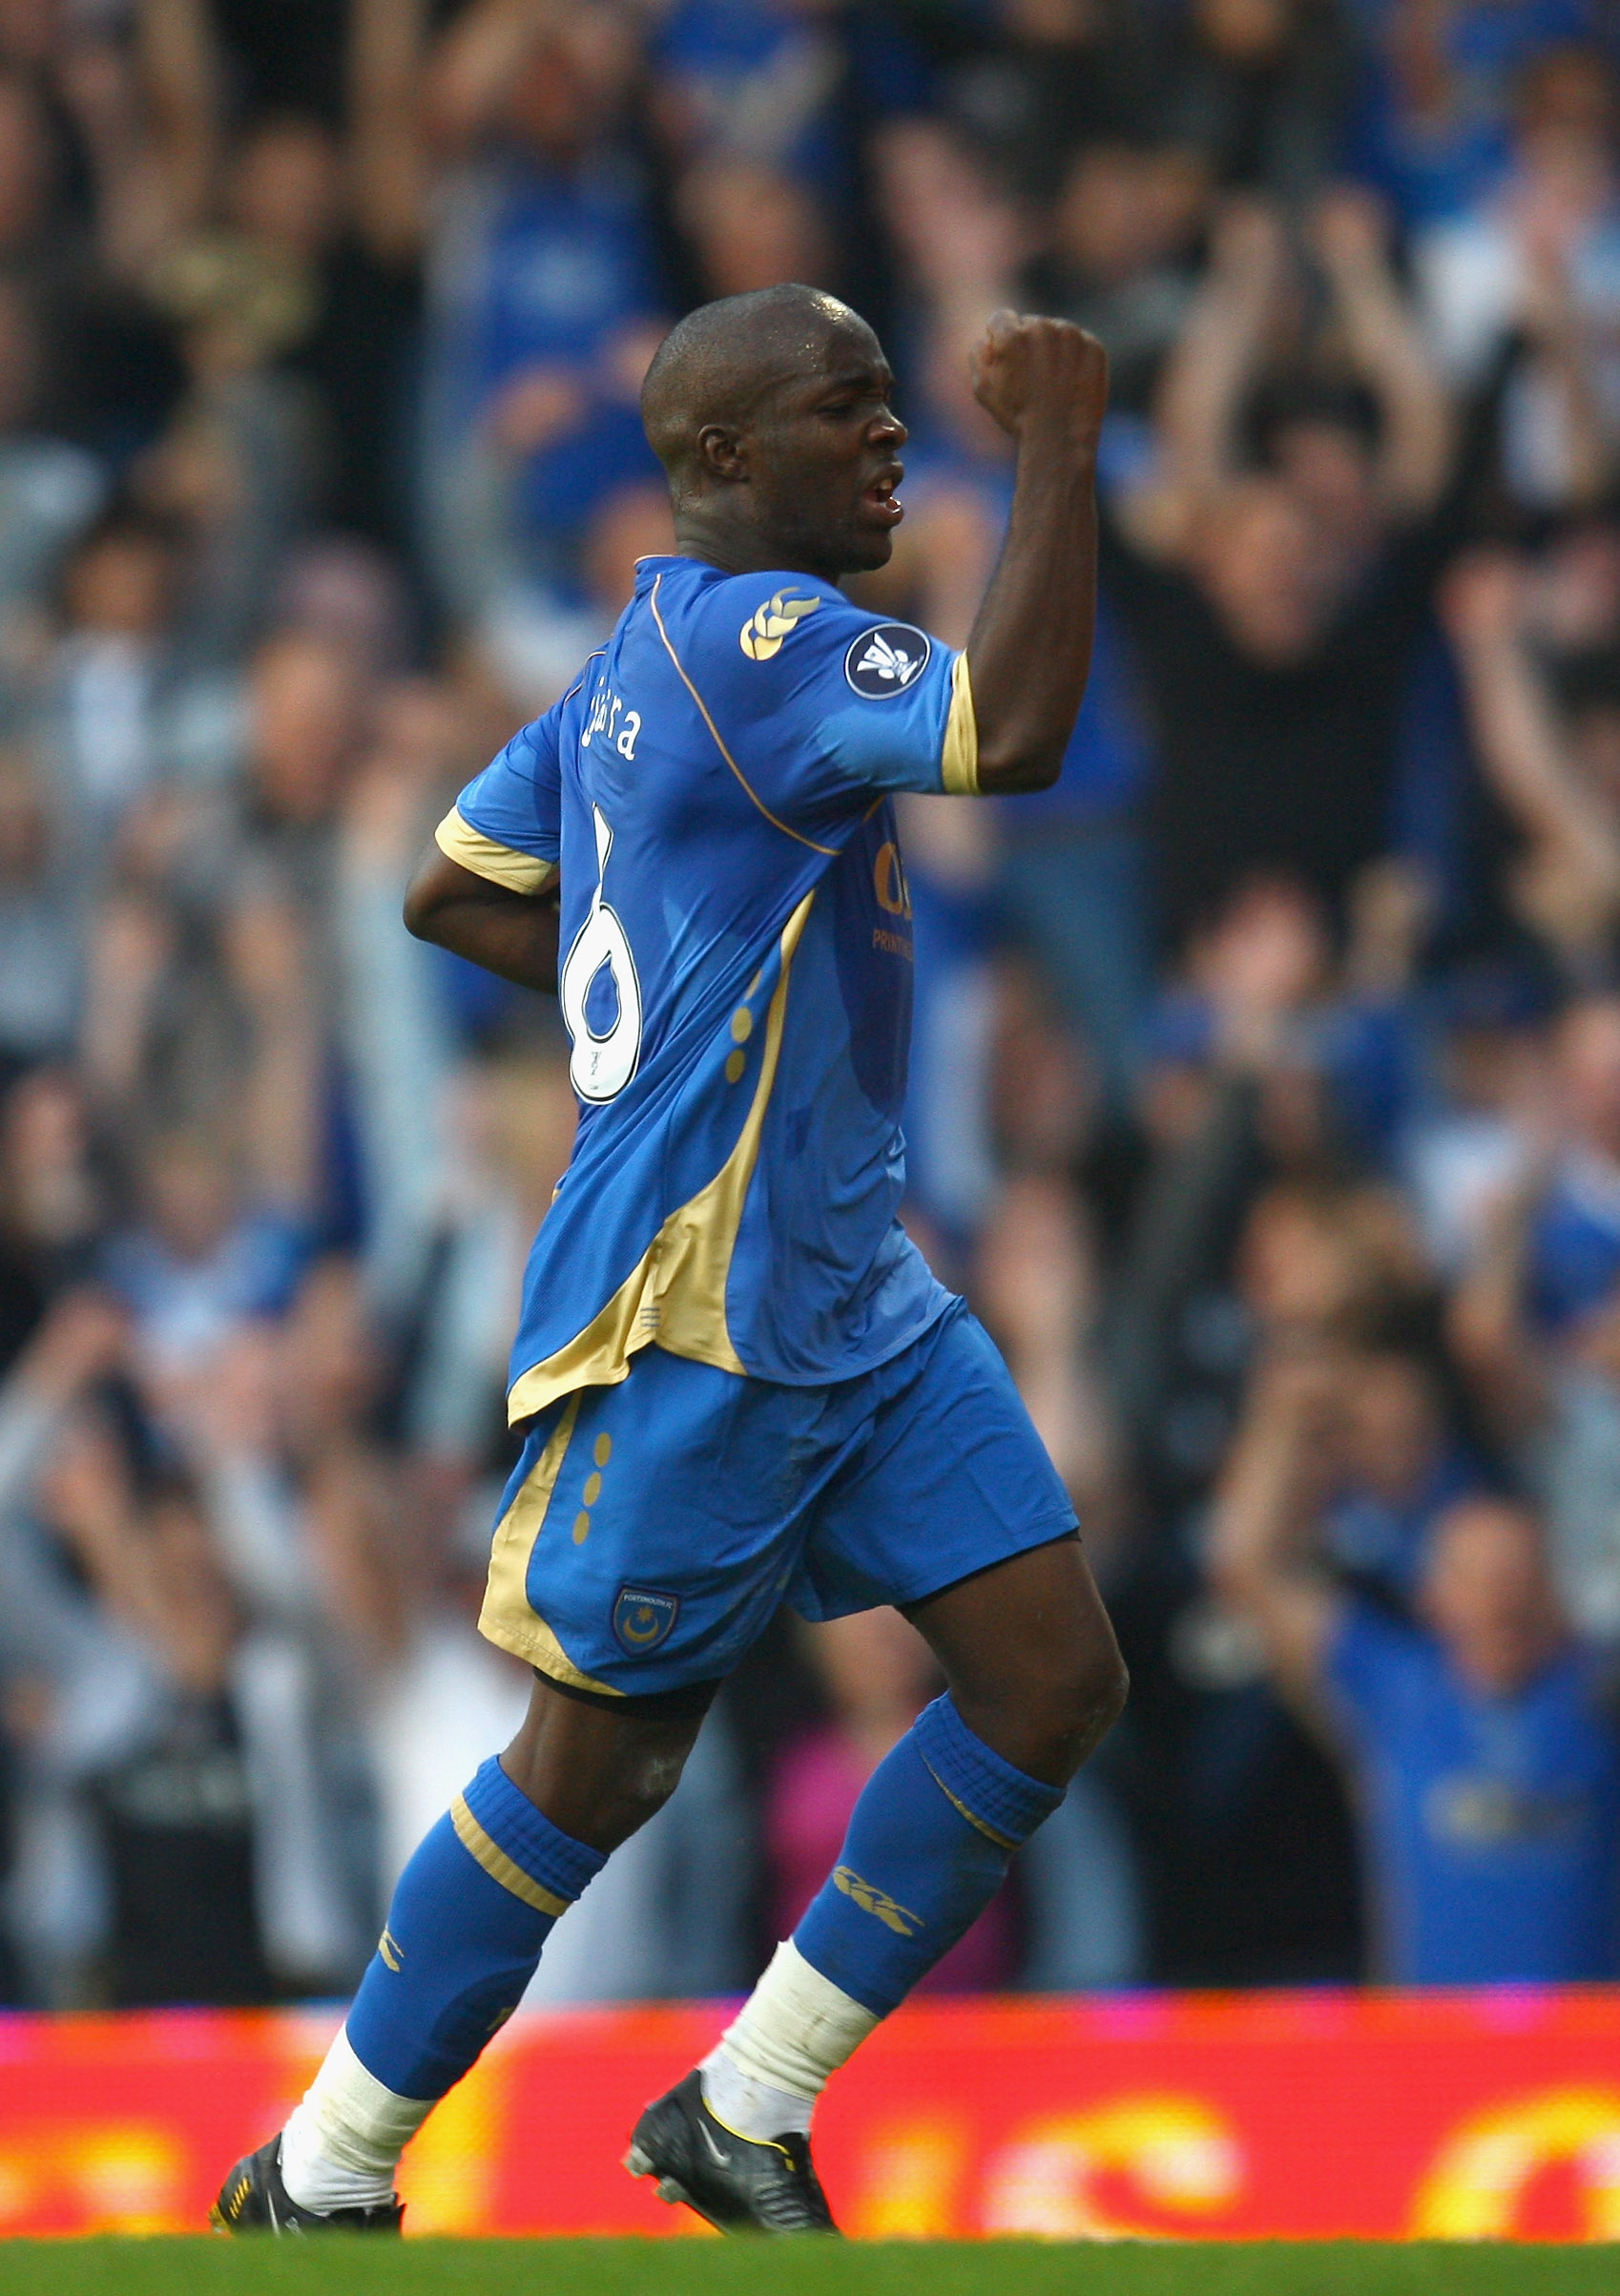 PORTSMOUTH, UNITED KINGDOM - SEPTEMBER 18:  Lassana Diarra of Portsmouth celebrates scoring the first goal for Portsmouth during the UEFA Cup round one first leg match between Portsmouth and Guimaraes at Fratton Park on September 18, 2008 in Portsmouth, E